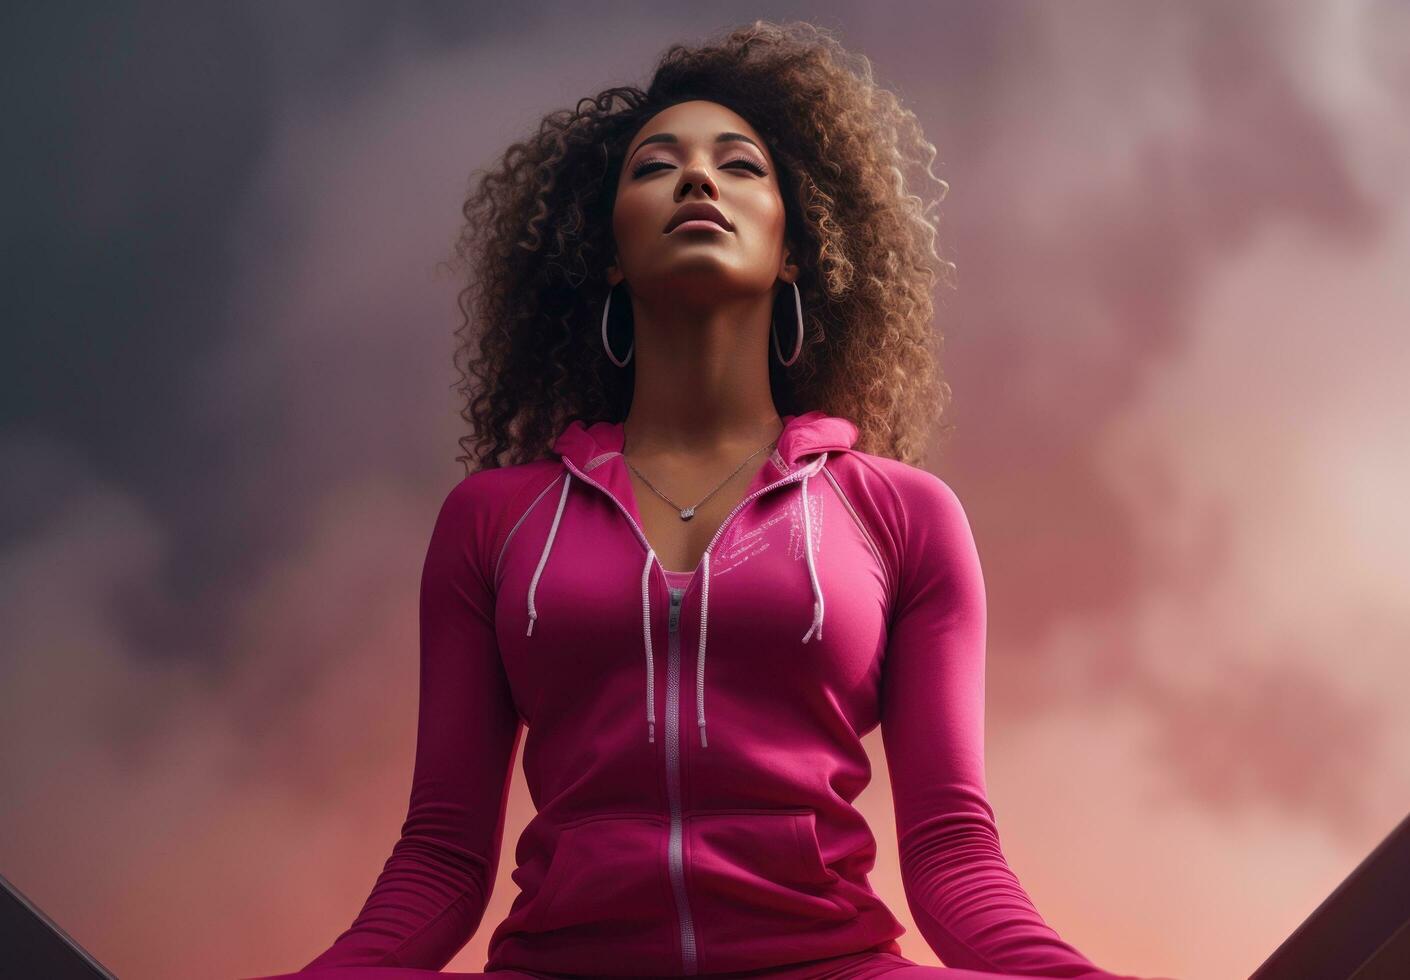 AI generated a black woman wearing a pink top is looking down at her feet, photo